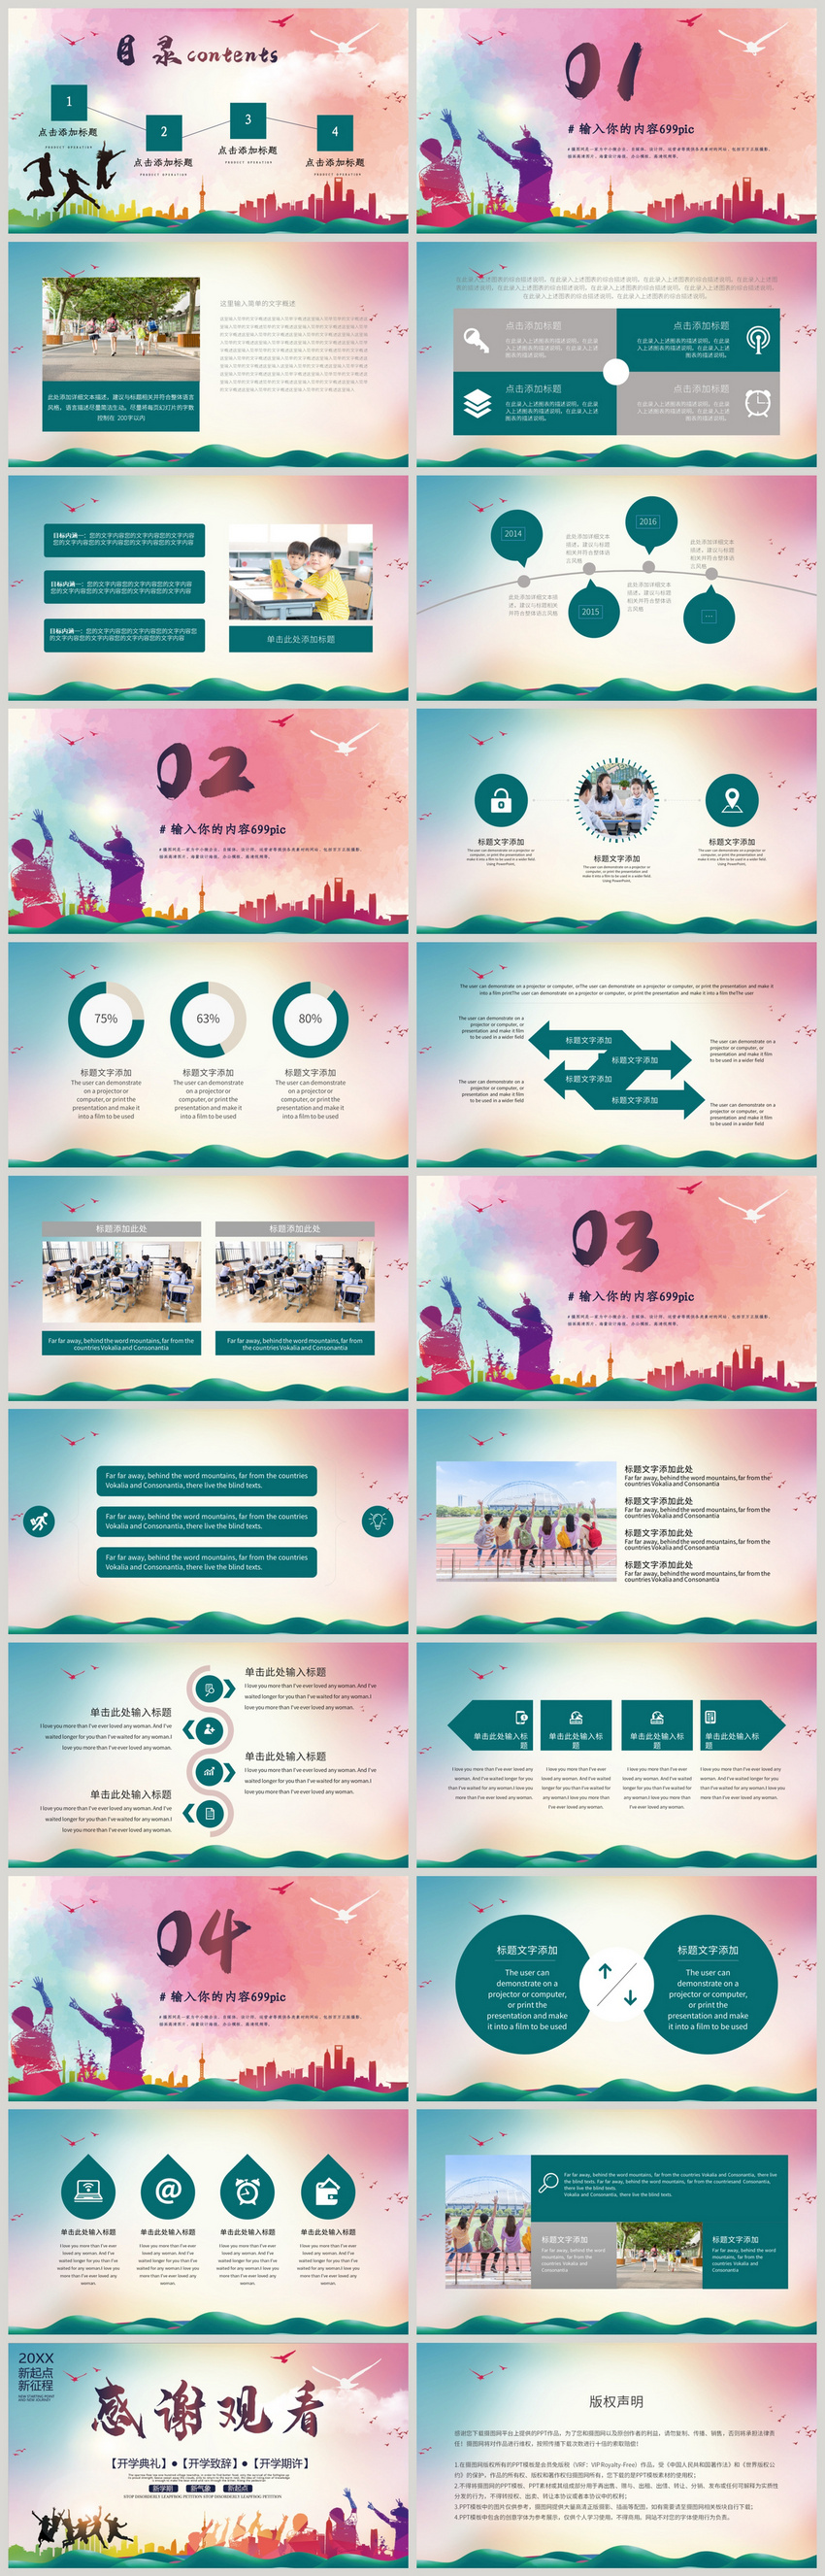 Opening Ceremony Ppt Template Powerpoint Templete Ppt Free Download 401609344 Lovepik Com